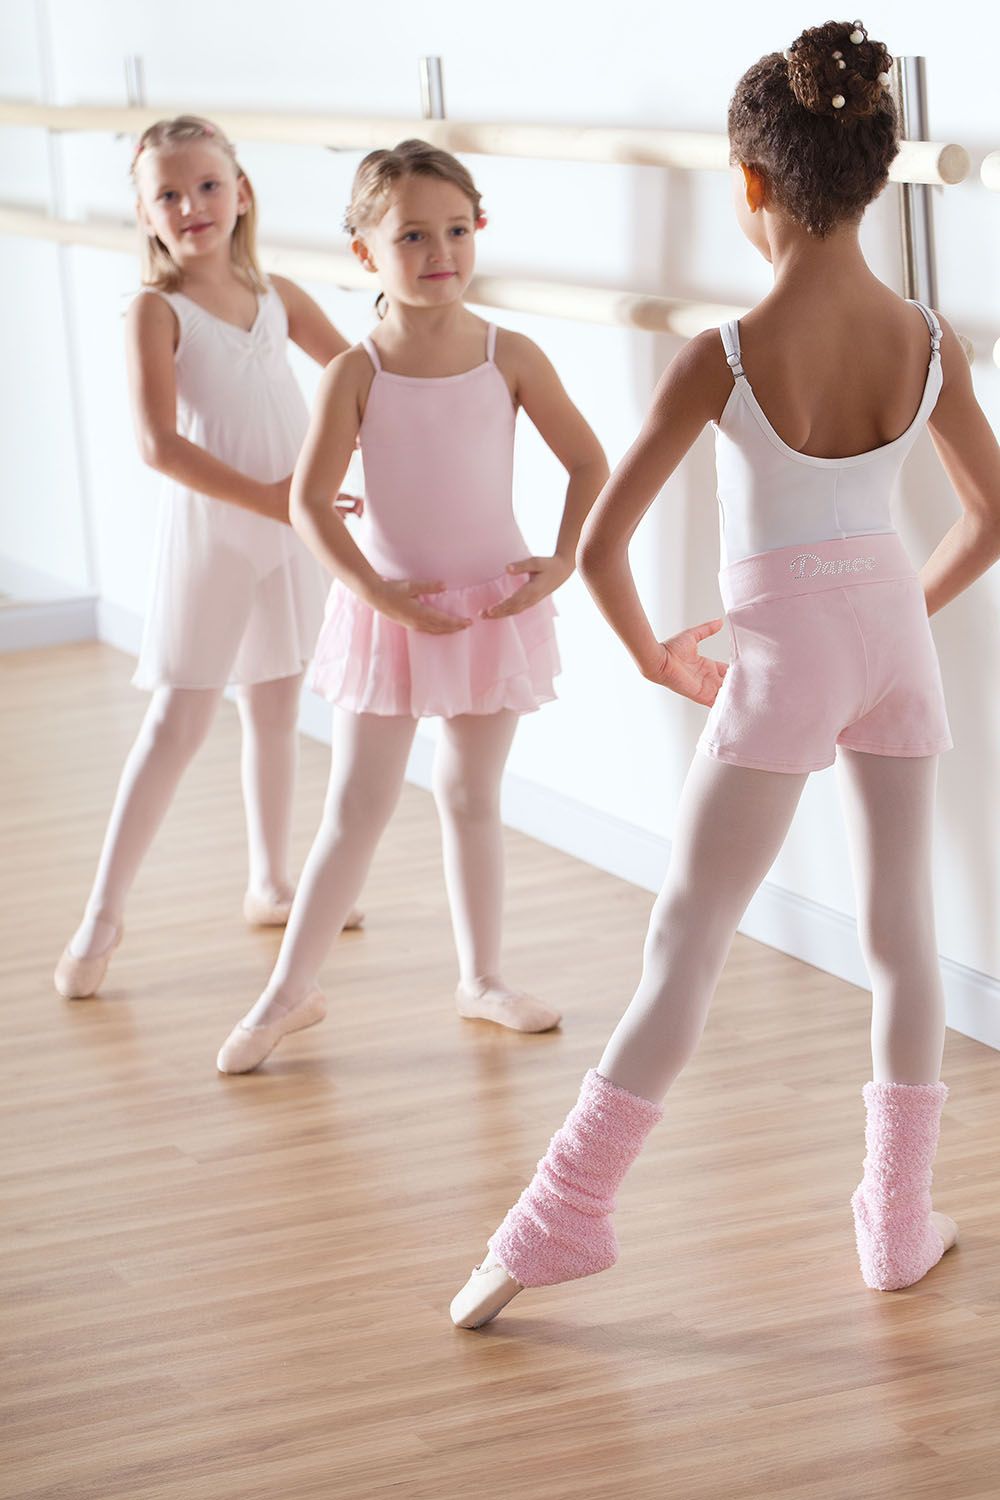 The Young Ballerina Little Girls And Ballet Pink Tutus Pinned